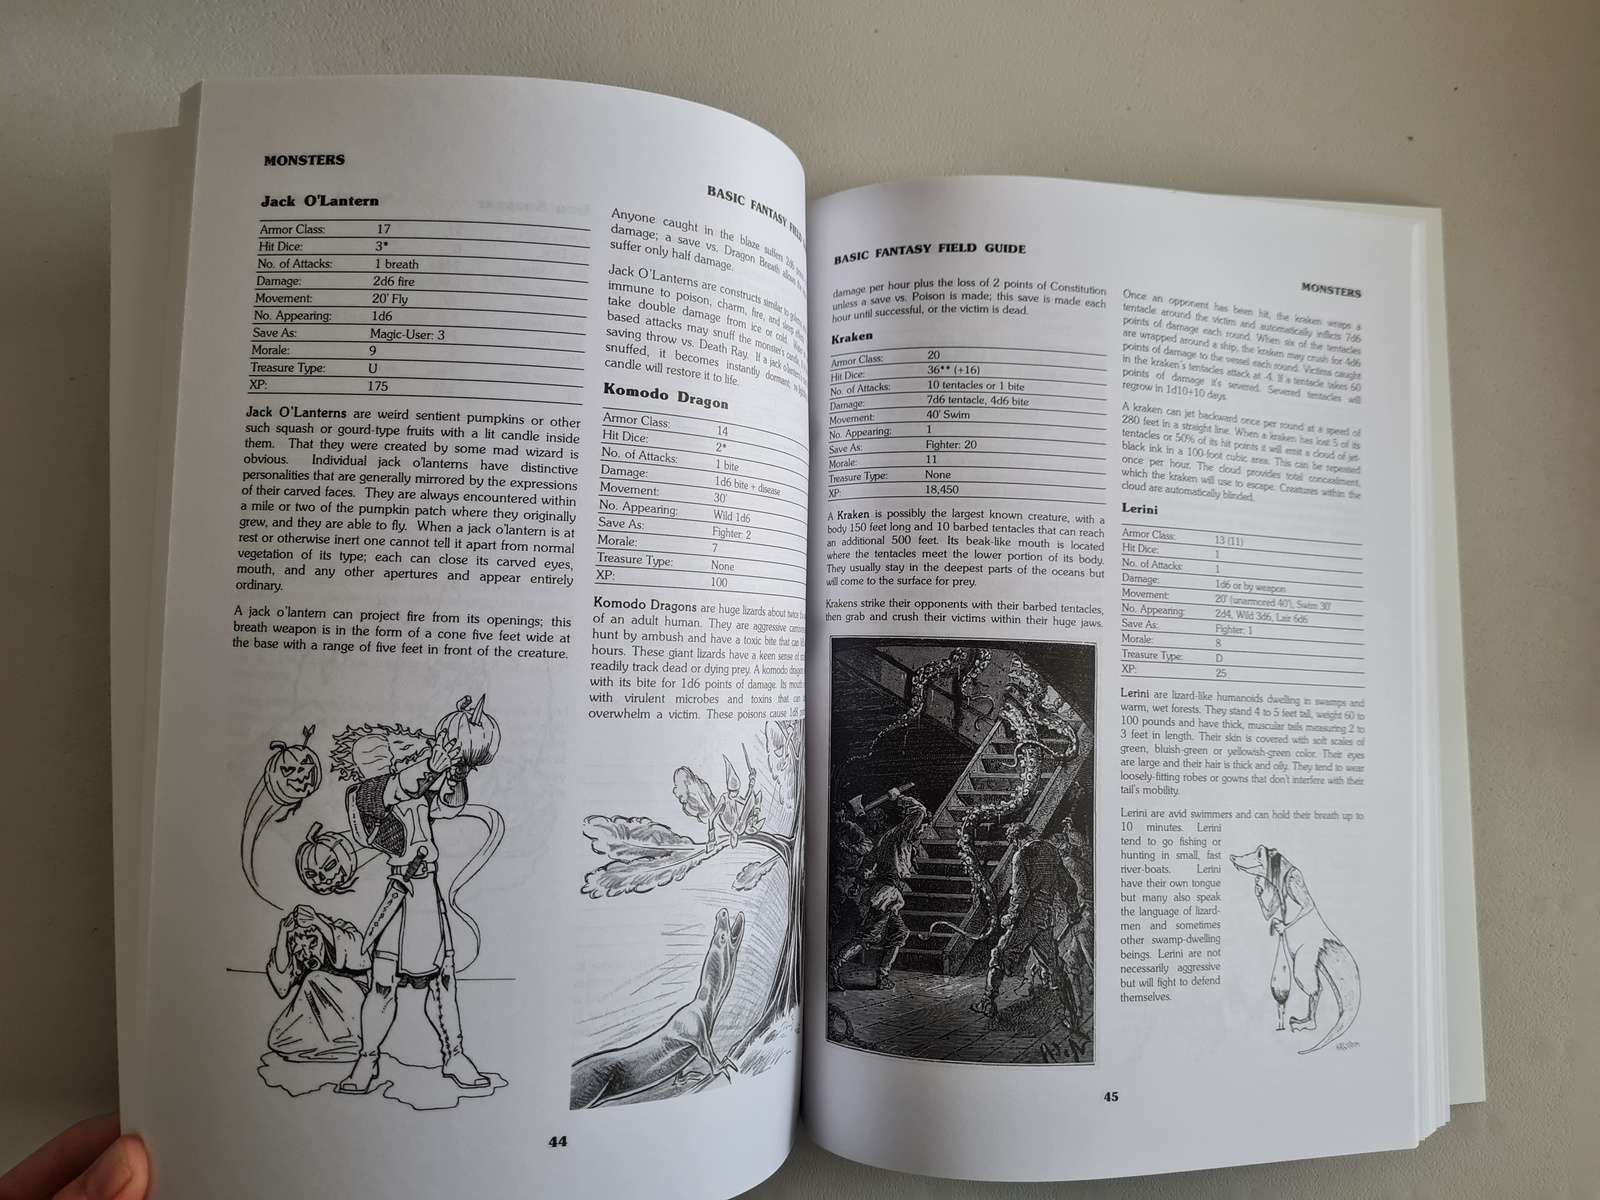 Basic Fantasy Roleplaying Game - Field Guide of Creatures Malevolent and Benign